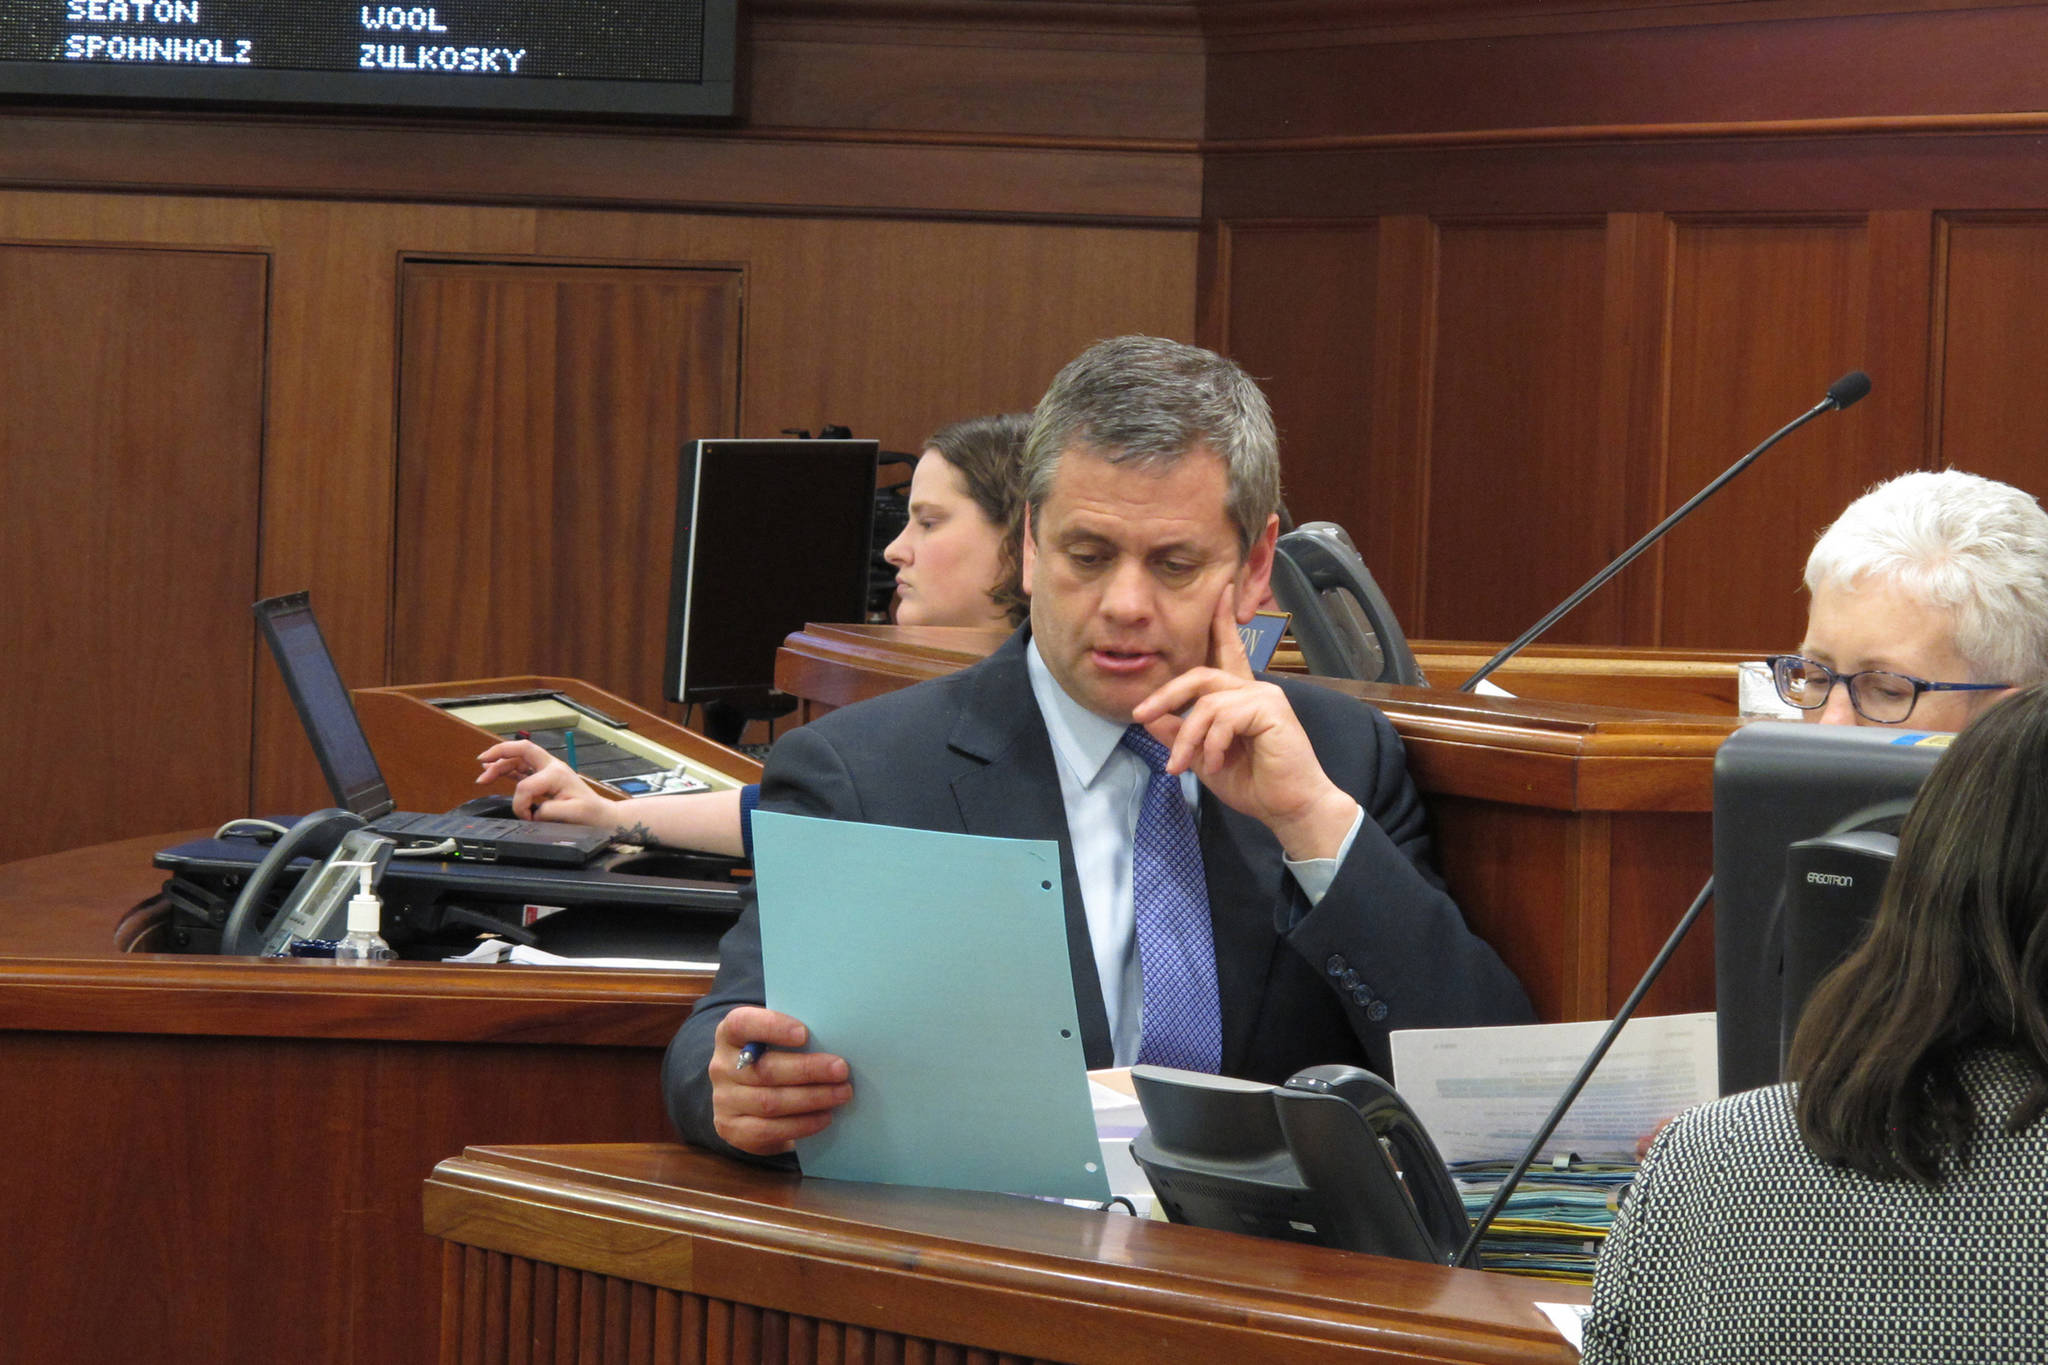 In this May 12, 2018 photo, Alaska House Minority Leader Chris Tuck looks over a document during a break in the Alaska House floor session in Juneau, Alaska. (Becky Bohrer | Associated Press File)